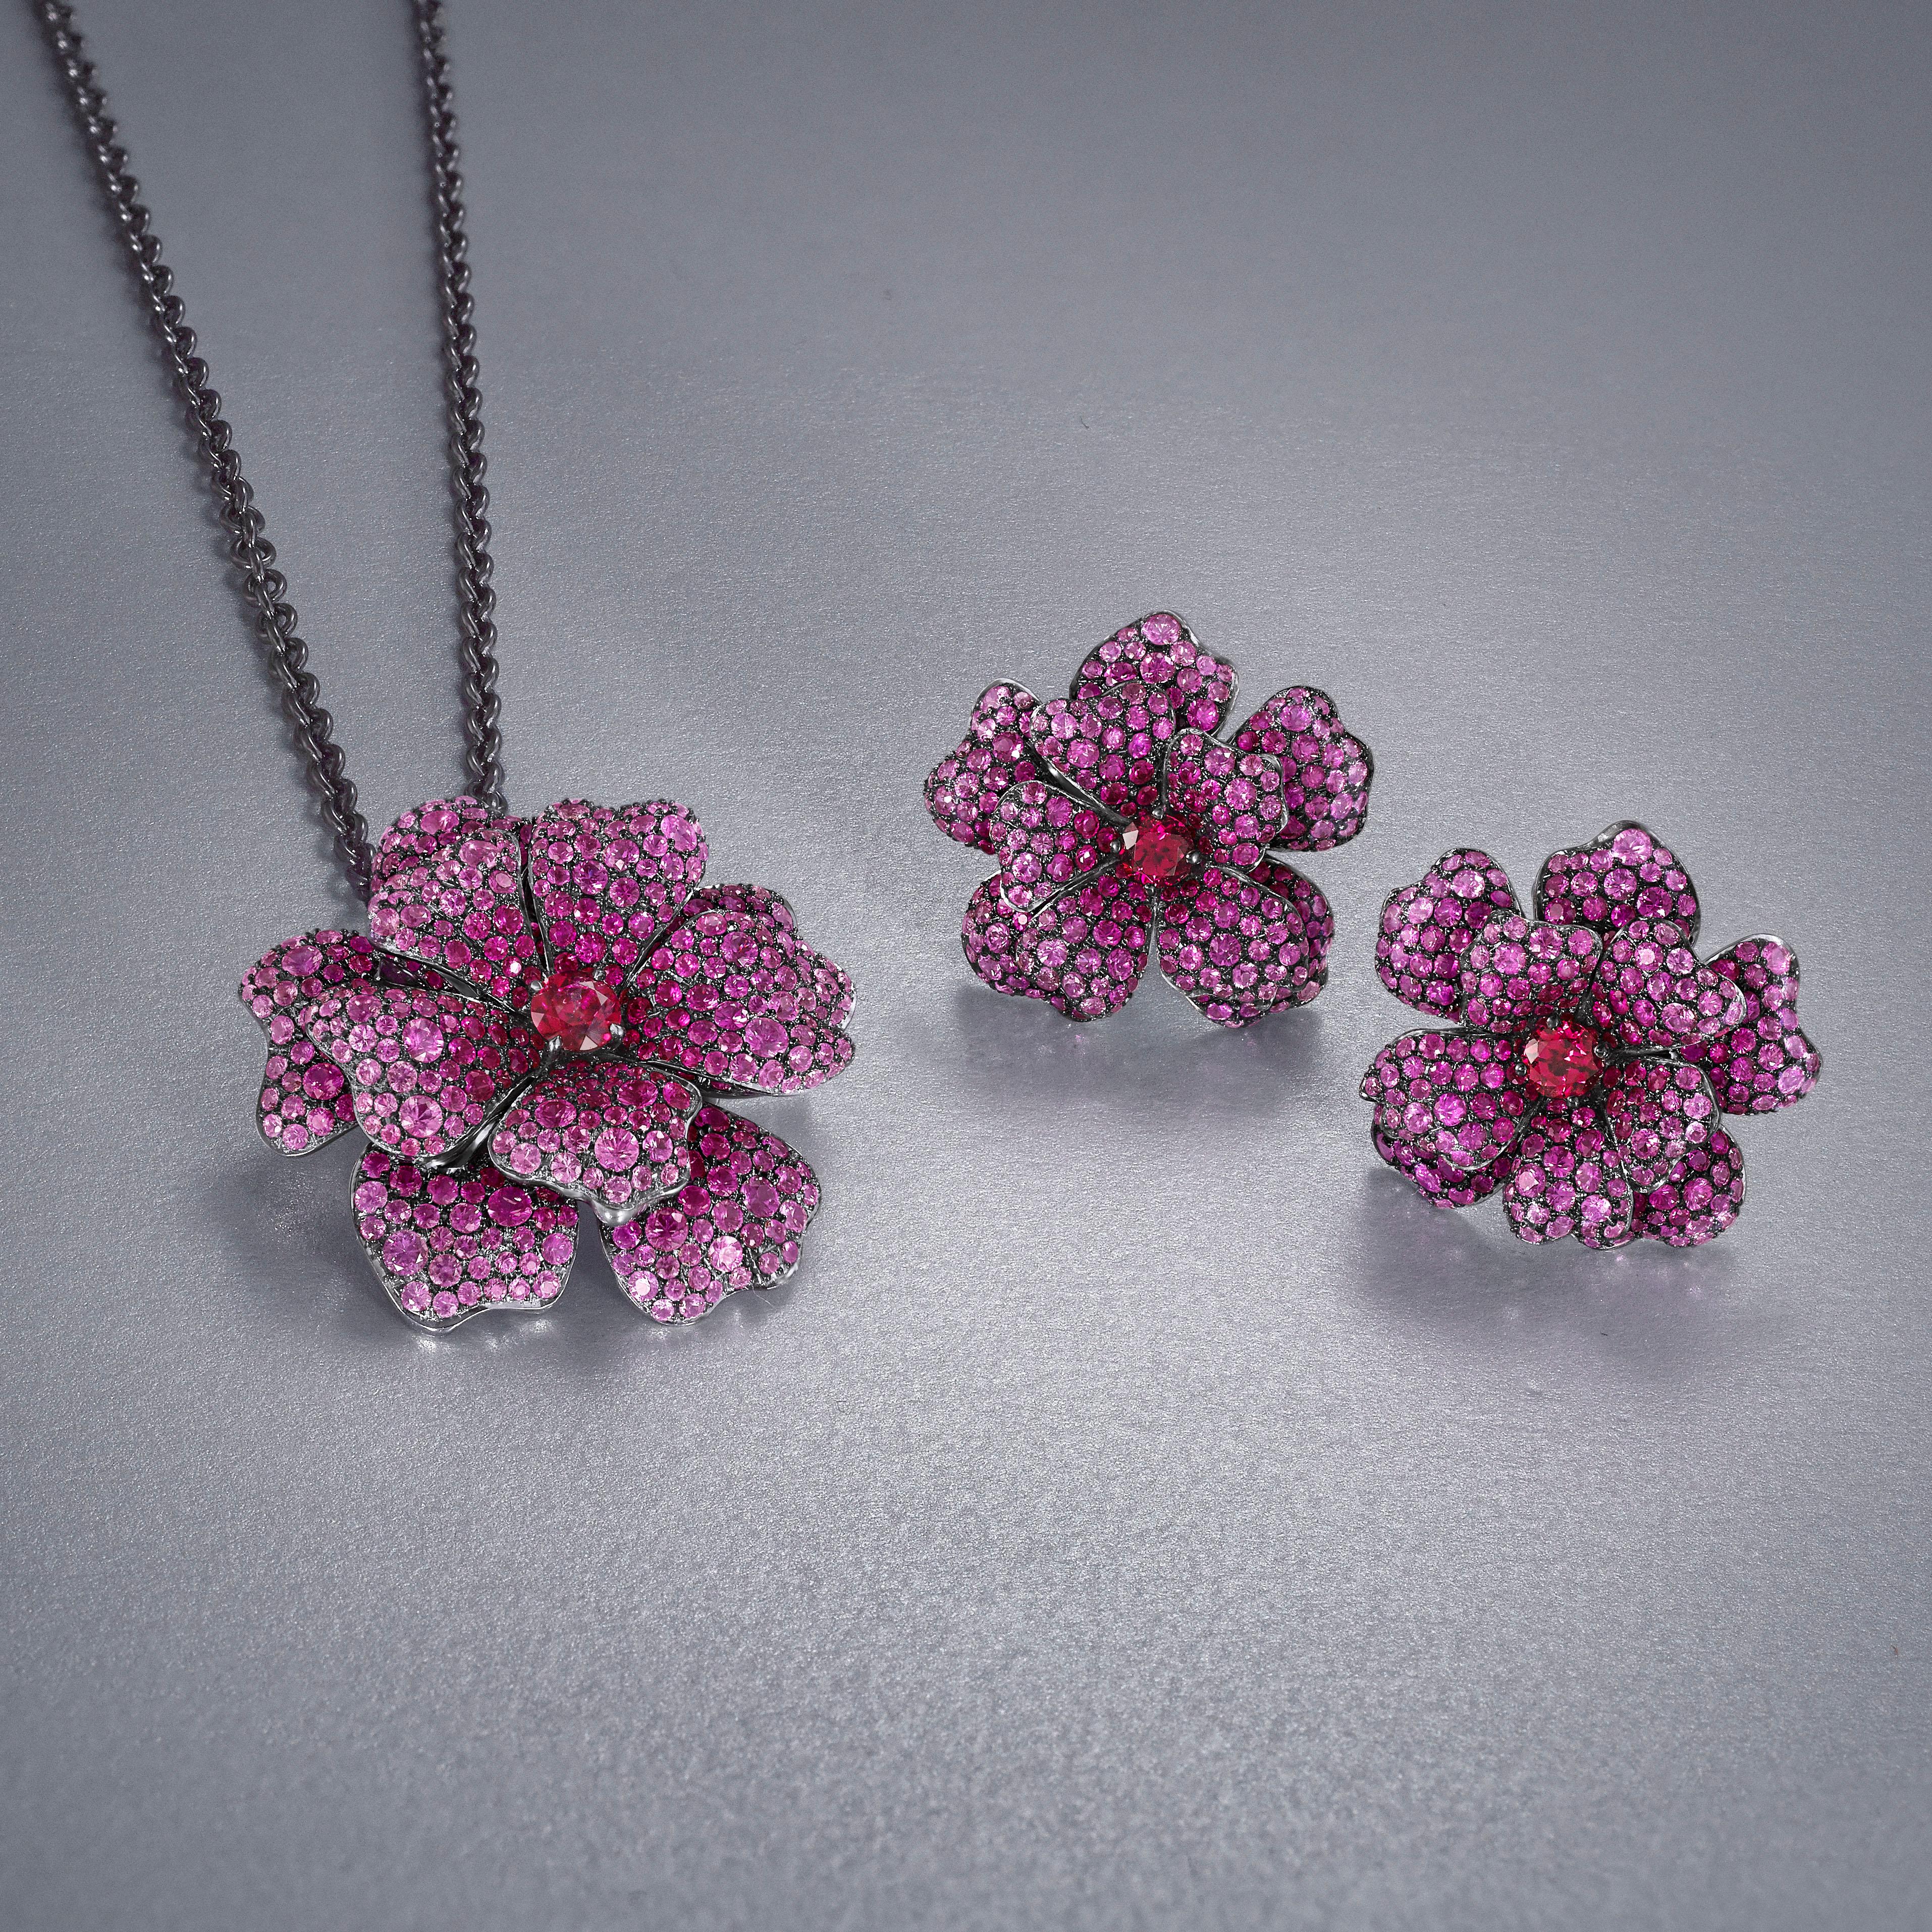 Romantic 18 Karat White Gold, Pink Sapphire, Ruby and Rubellite Flower Pendant and Brooch For Sale